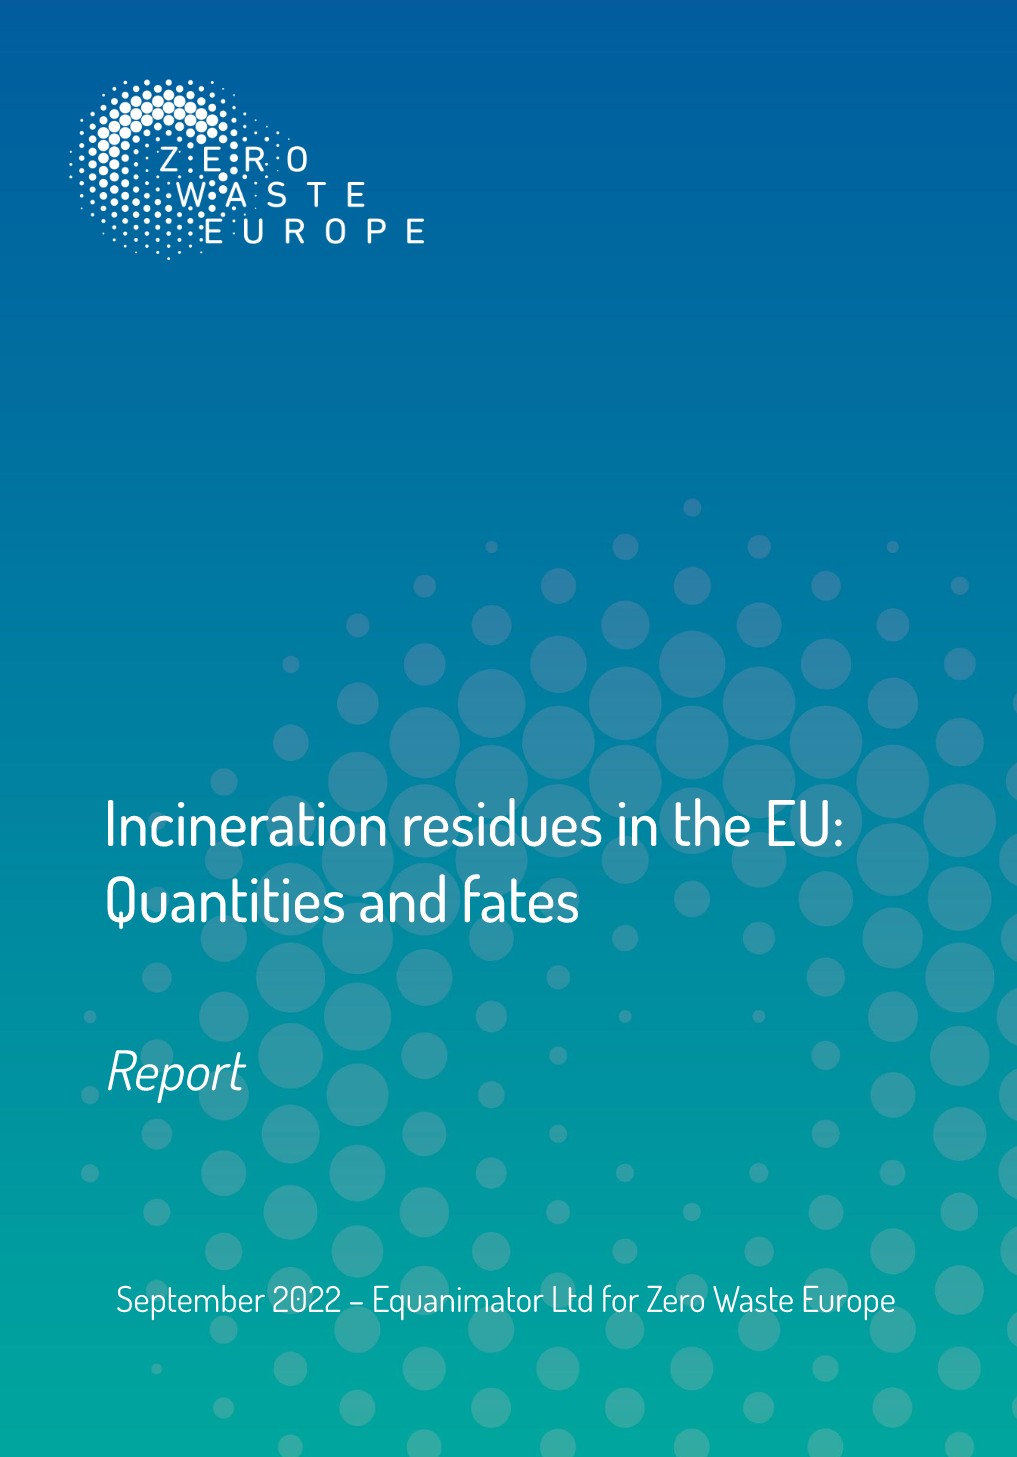 Incineration and residues in the EU: quantities and fates